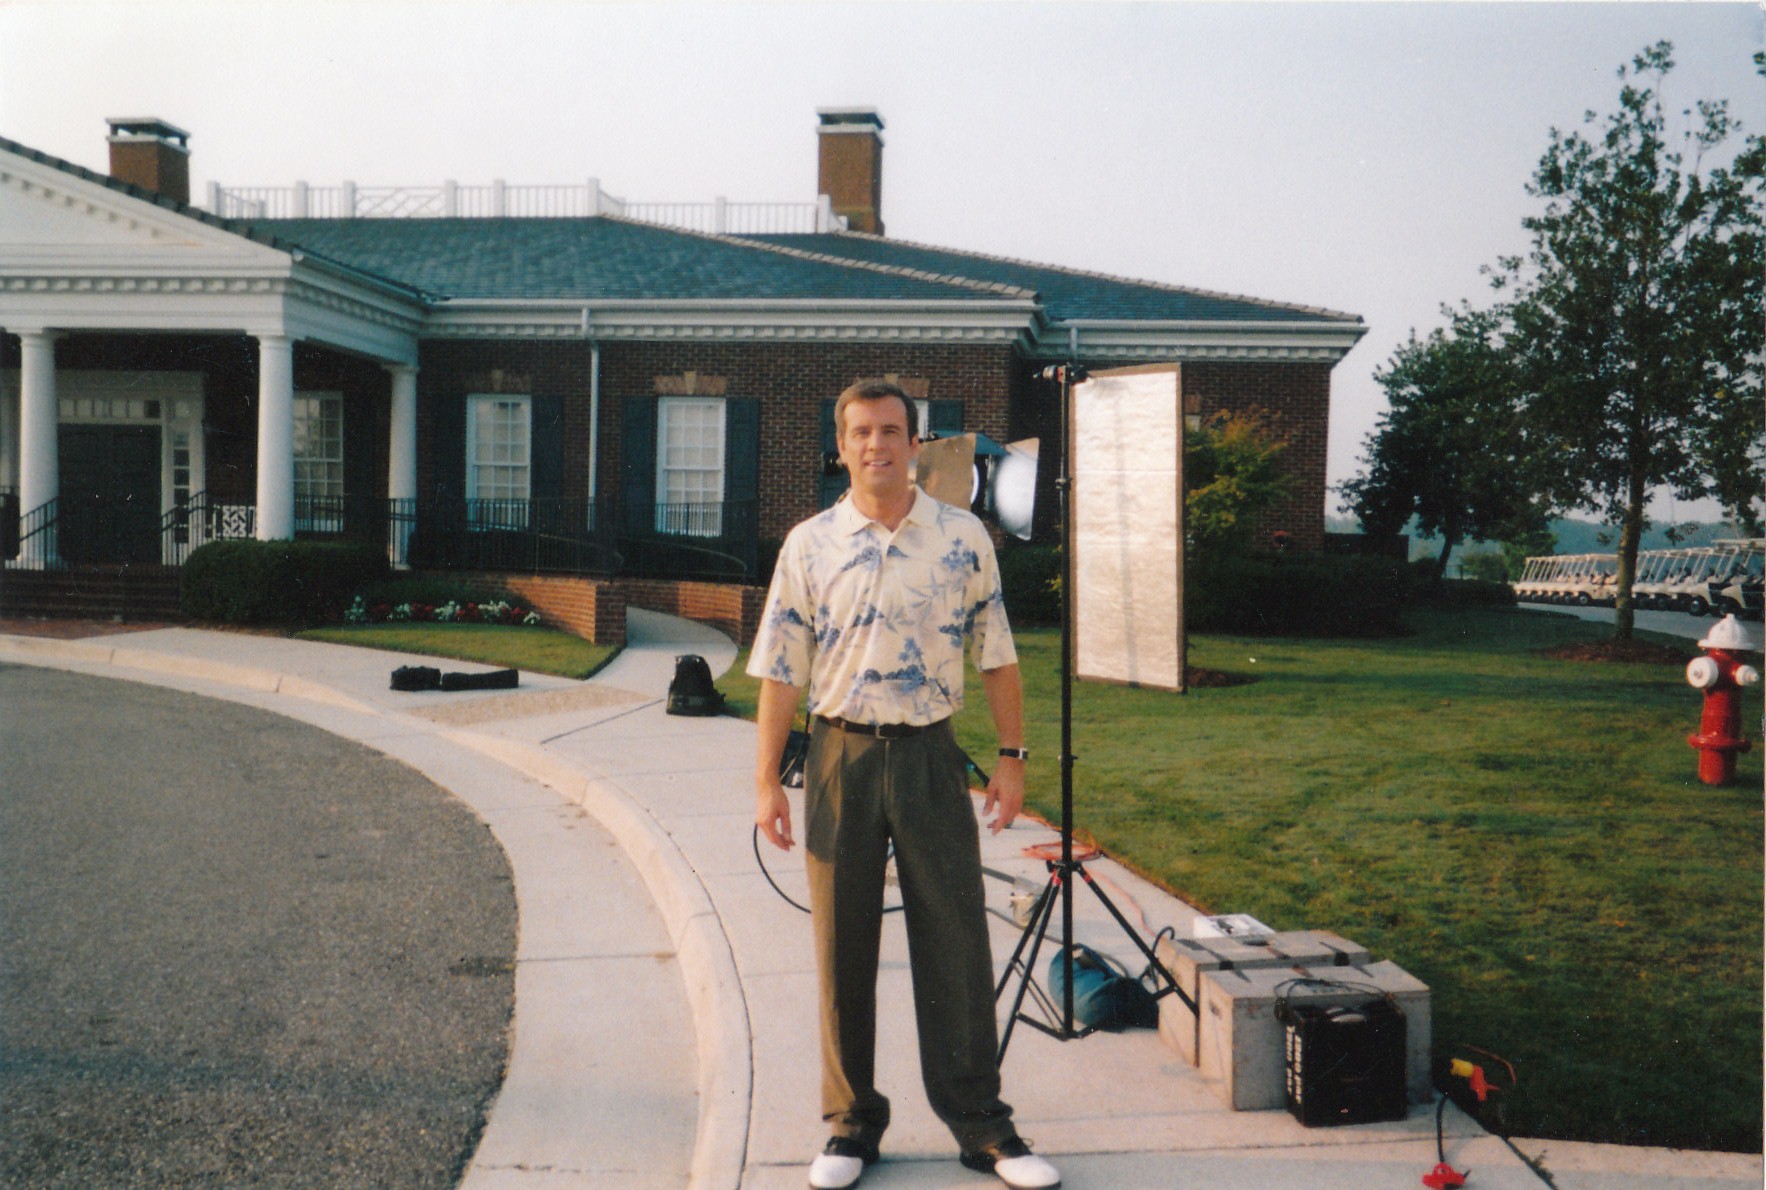 Scott on the set of a commercial for Mortgage Freedom Virginia Beach, VA 2004